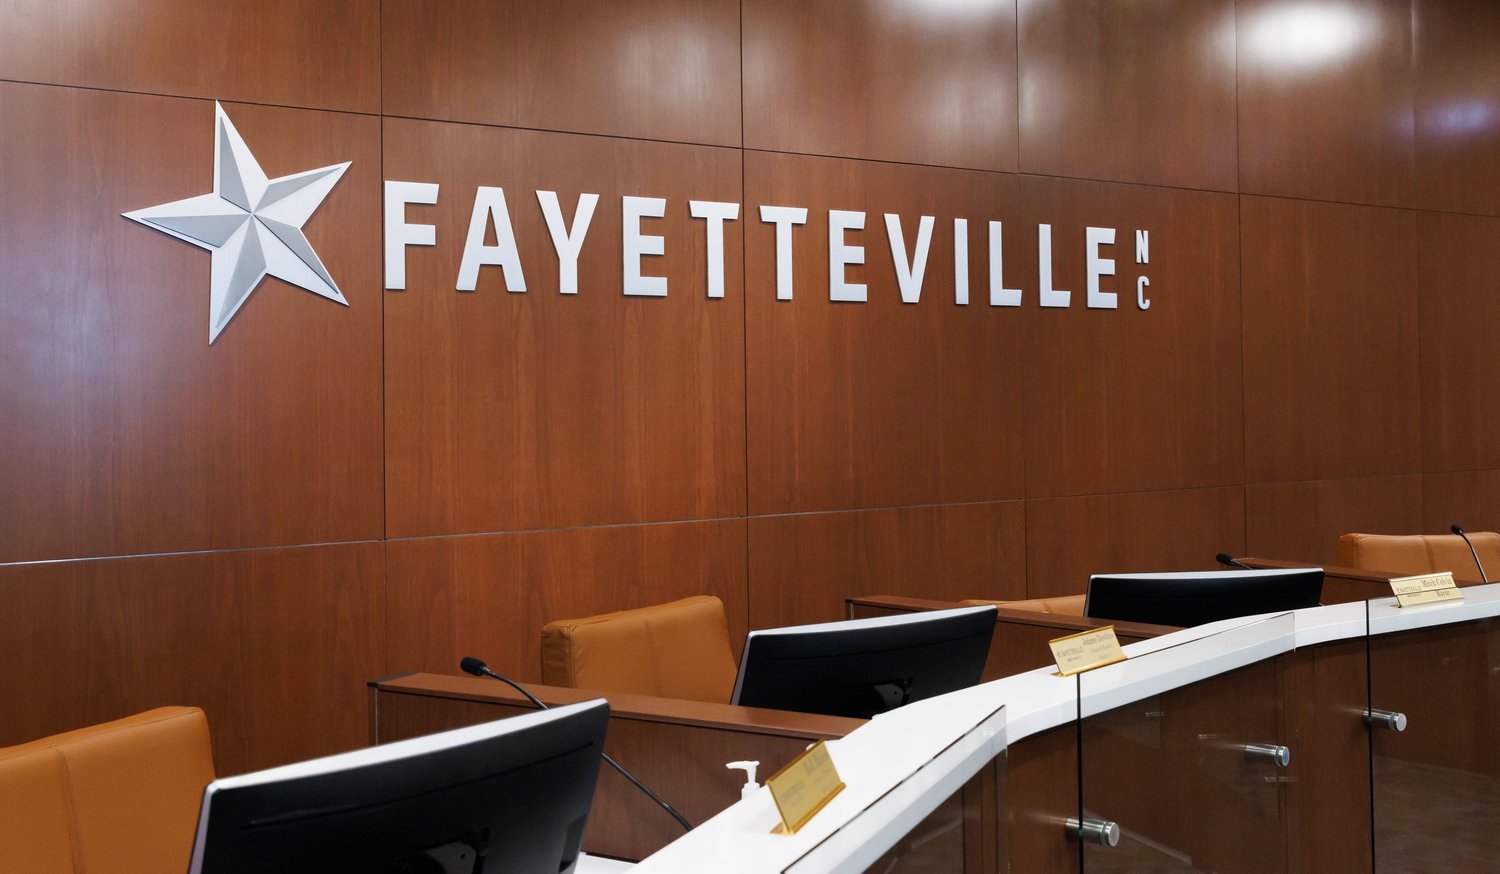 The Fayetteville City Council is preparing a budget for next year that will have to account for a loss of sales tax revenue because of an decision by Cumberland County.